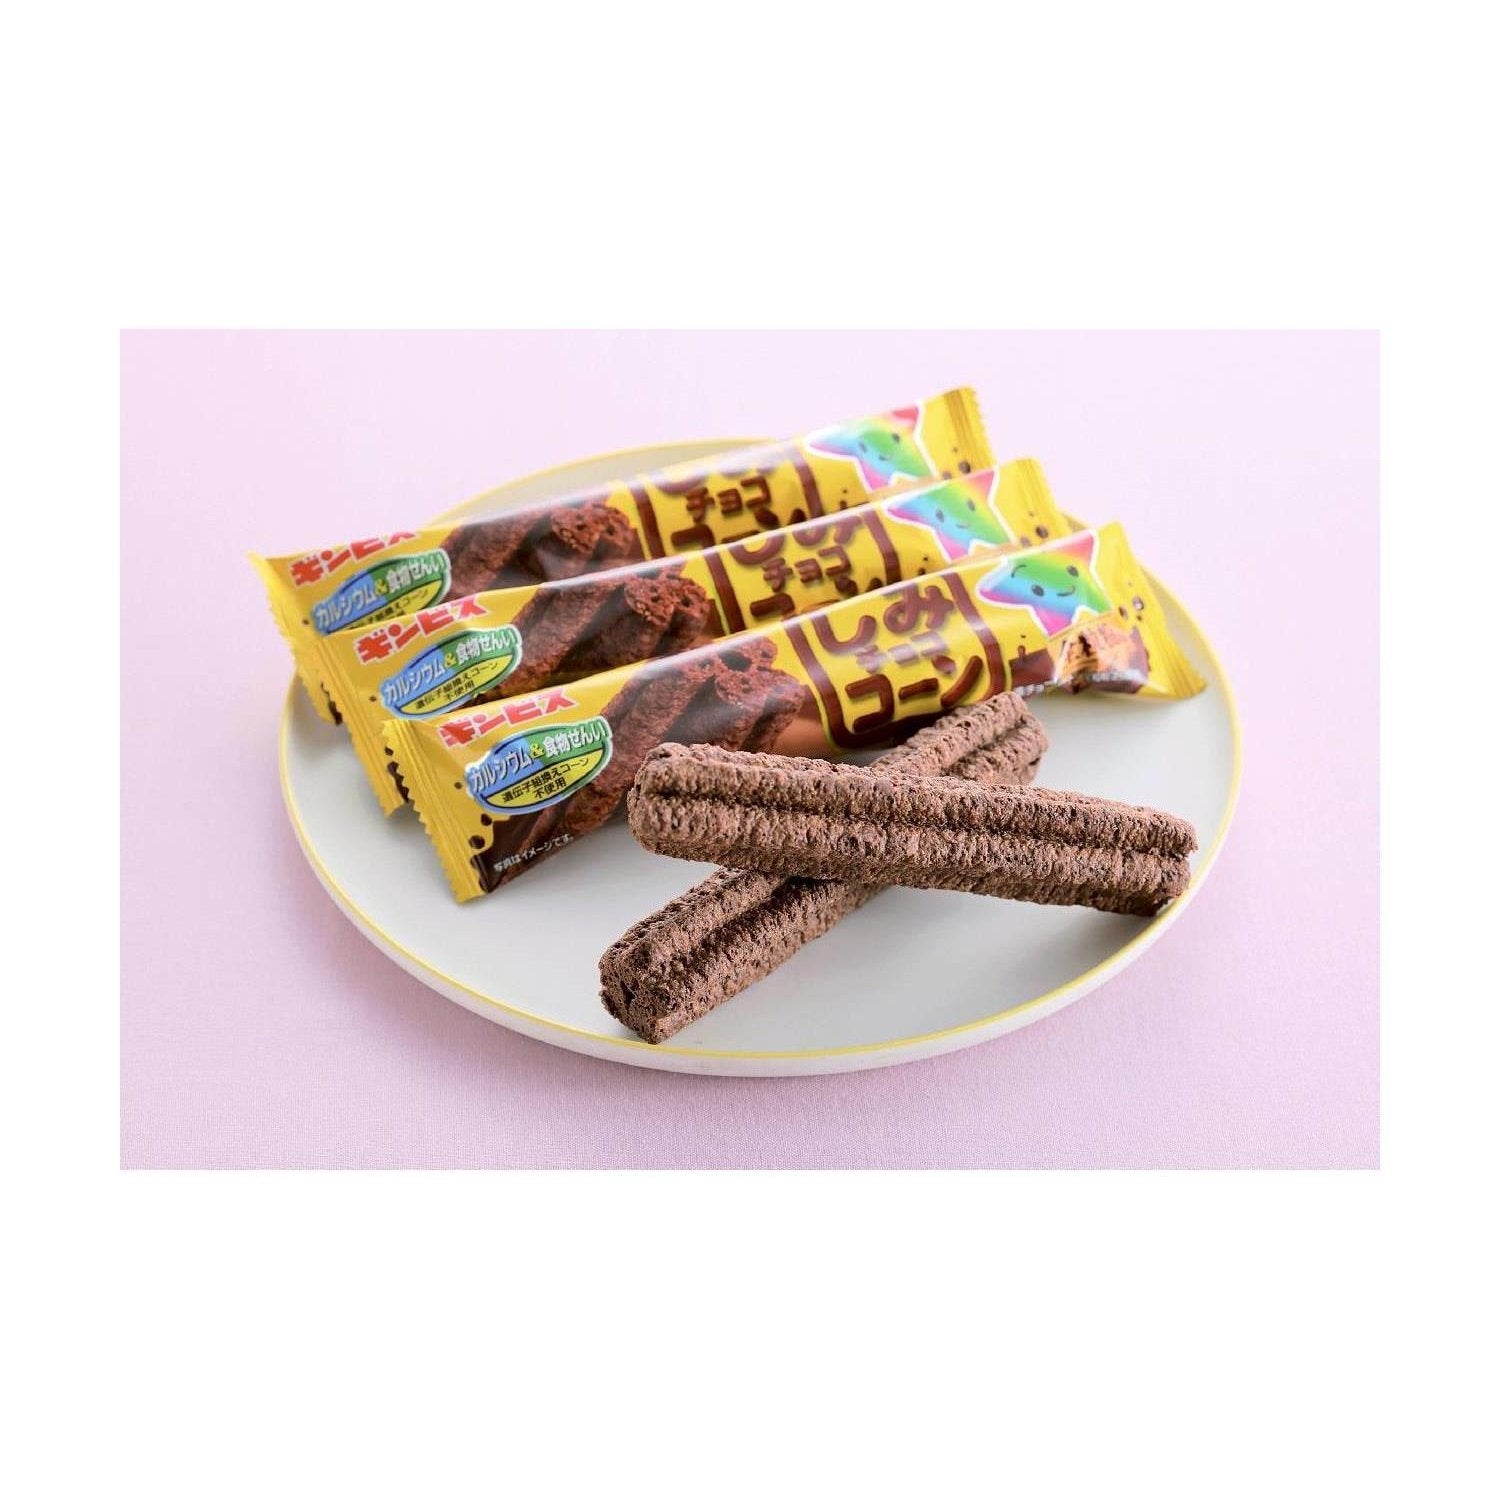 Ginbis Shimi Choco Stick Chocolate Covered Corn Puff Snack (Pack of 10)